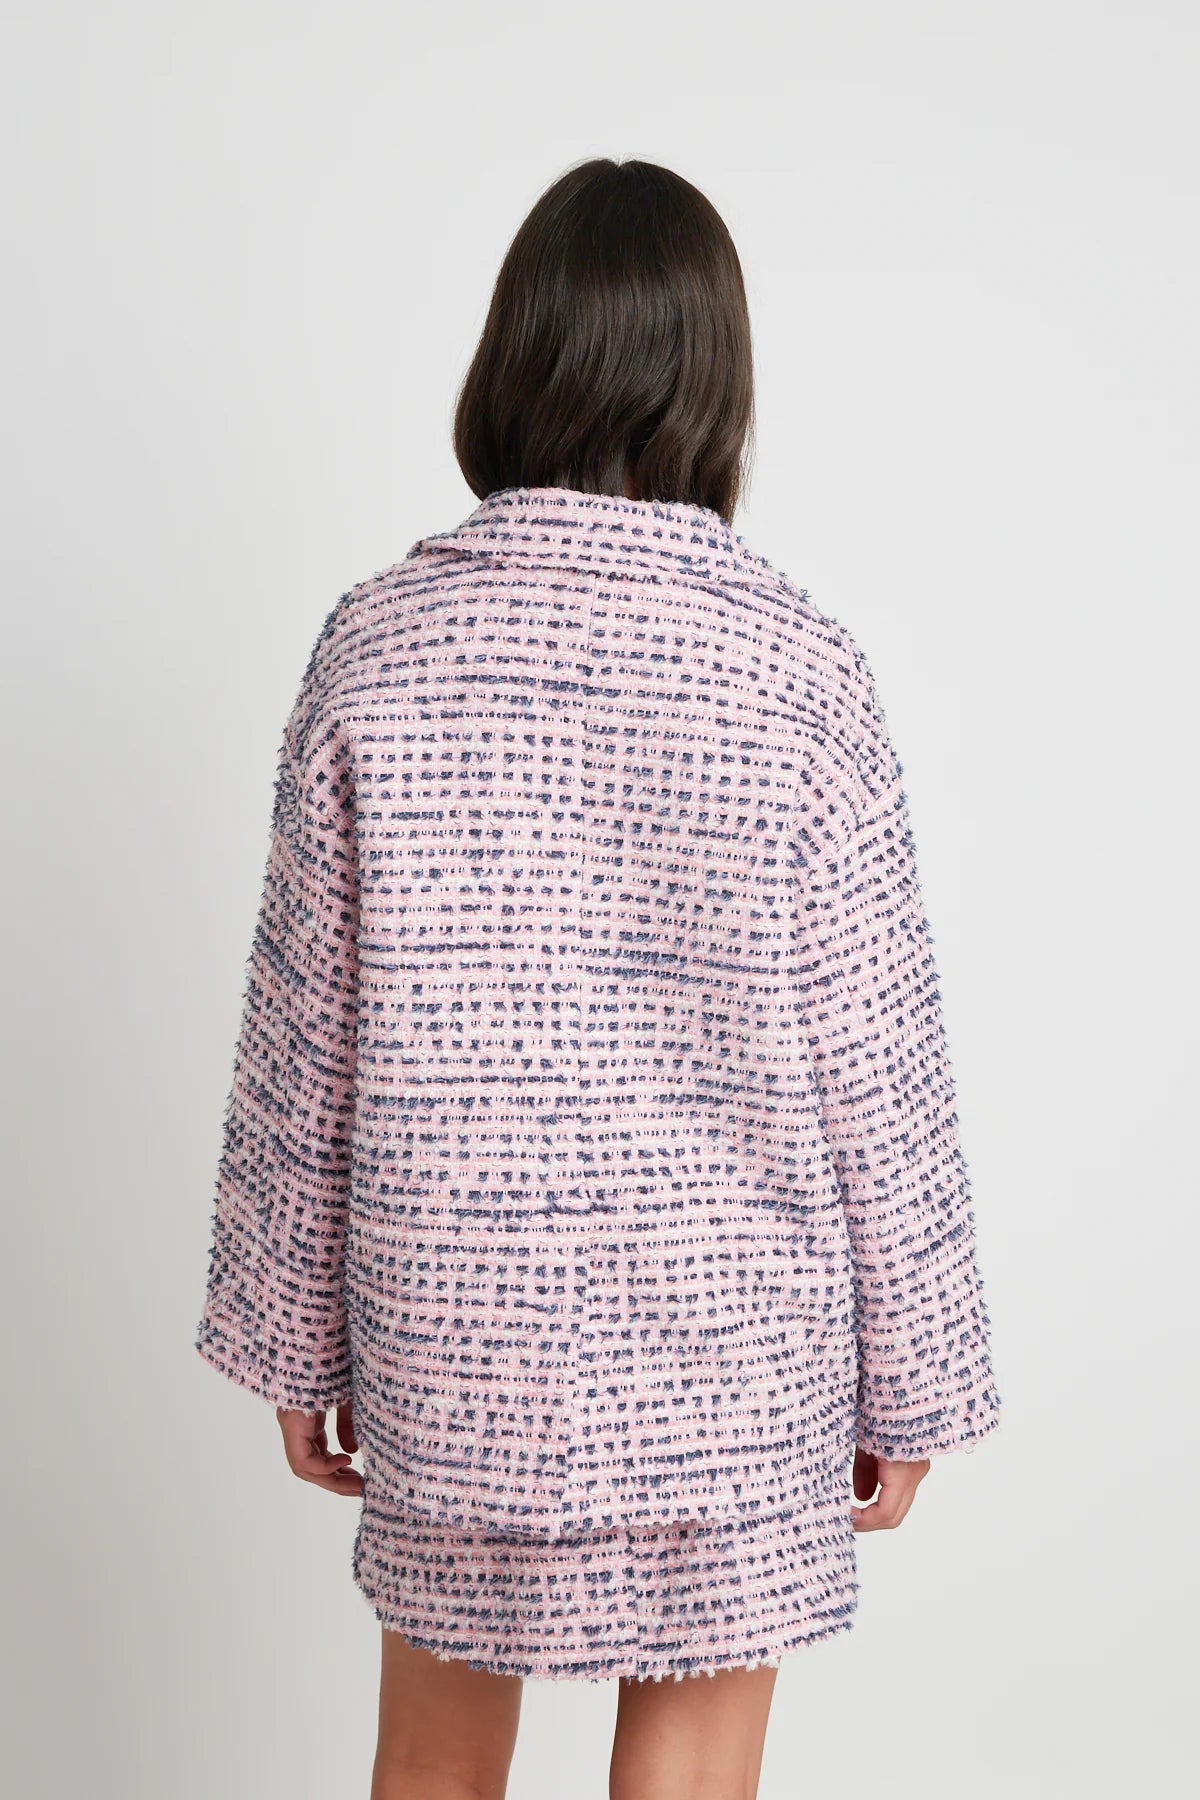 twenty-seven names | The Way You Look Tonight Jacket | Pink Tweed | Palm Boutique